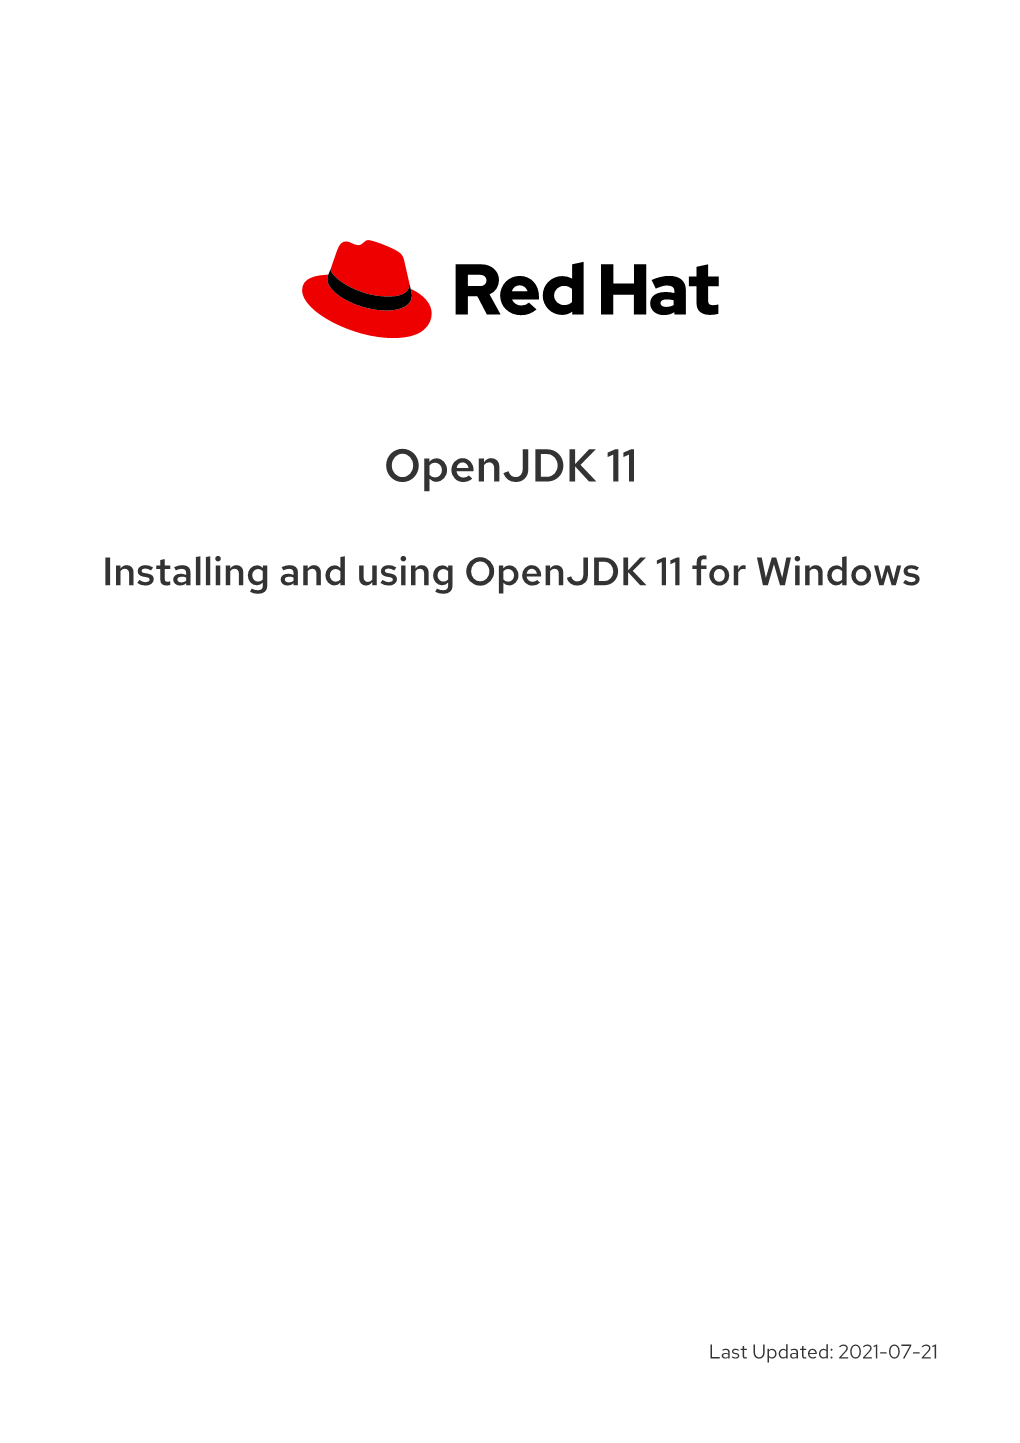 Installing and Using Openjdk 11 for Windows